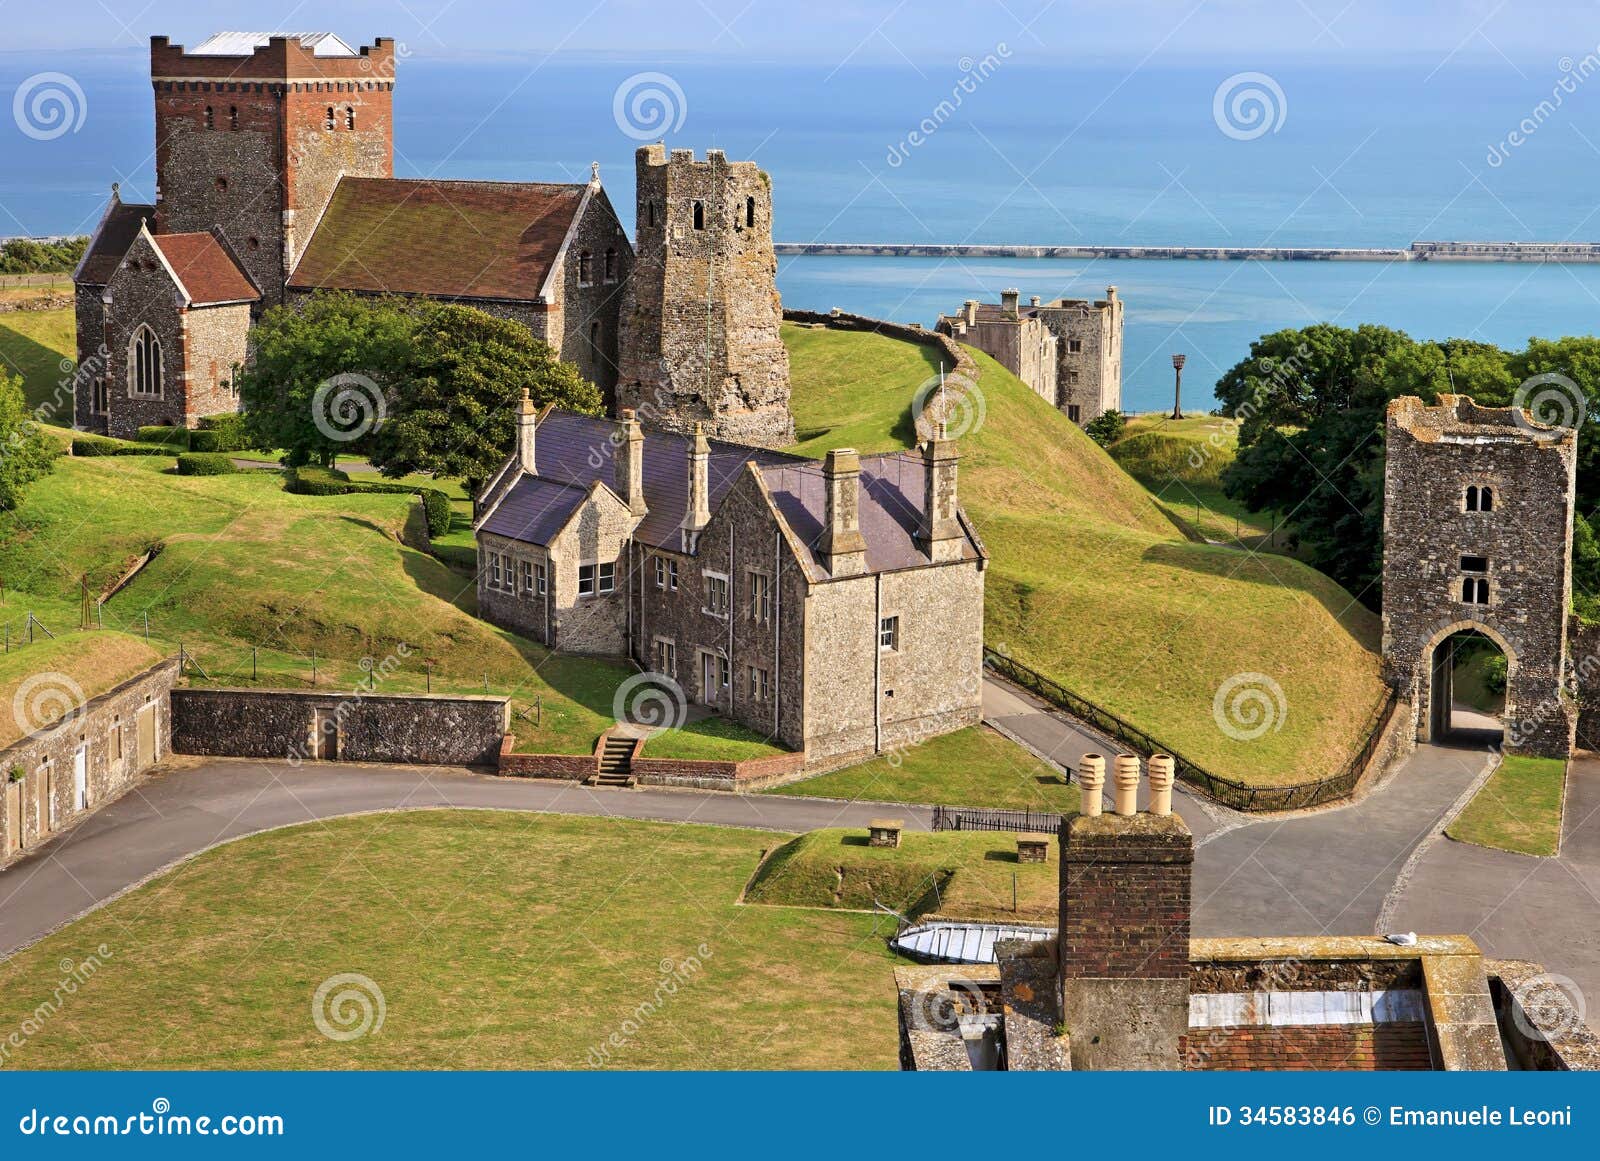 panoramic view of the st mary in castro church in the grounds of dover castle in england